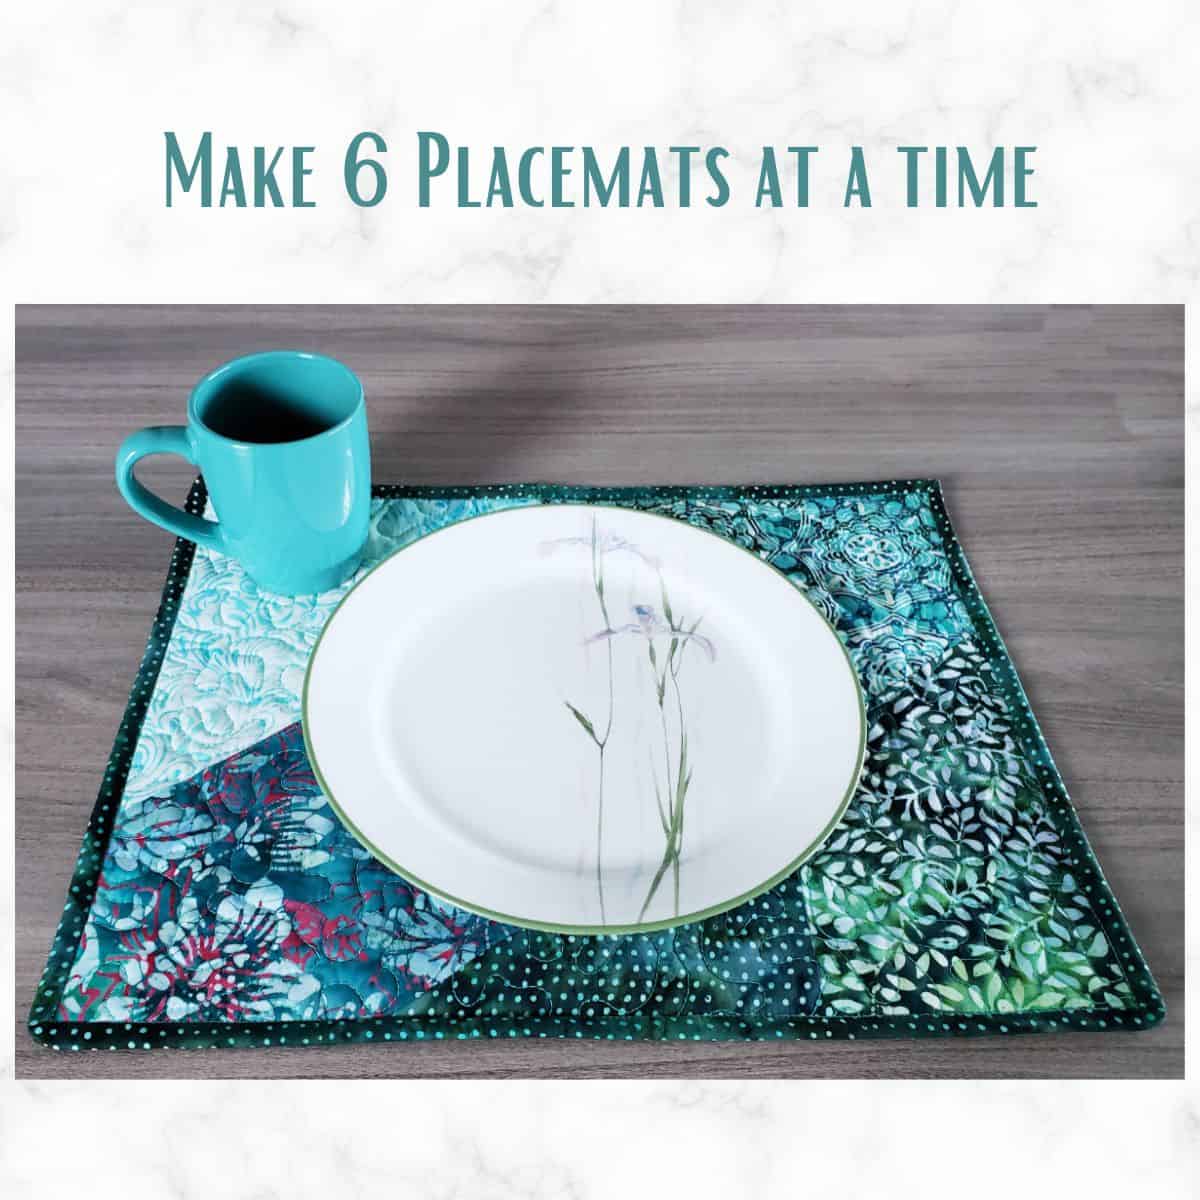 Make 6 placemats at a time